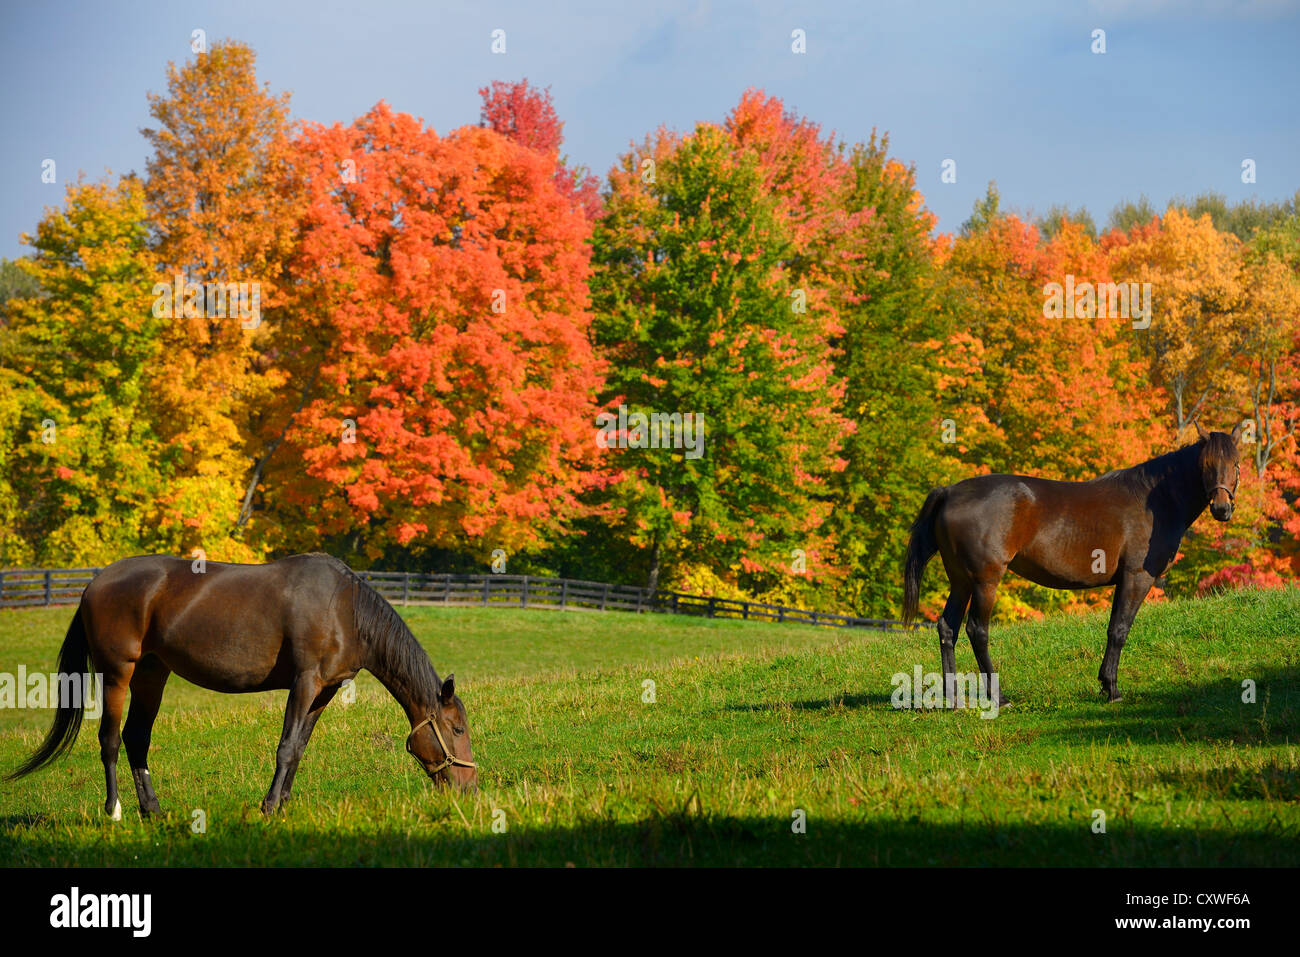 Two brown horses in a paddock with red Fall maple trees in rural Caledon Ontario Canada Stock Photo